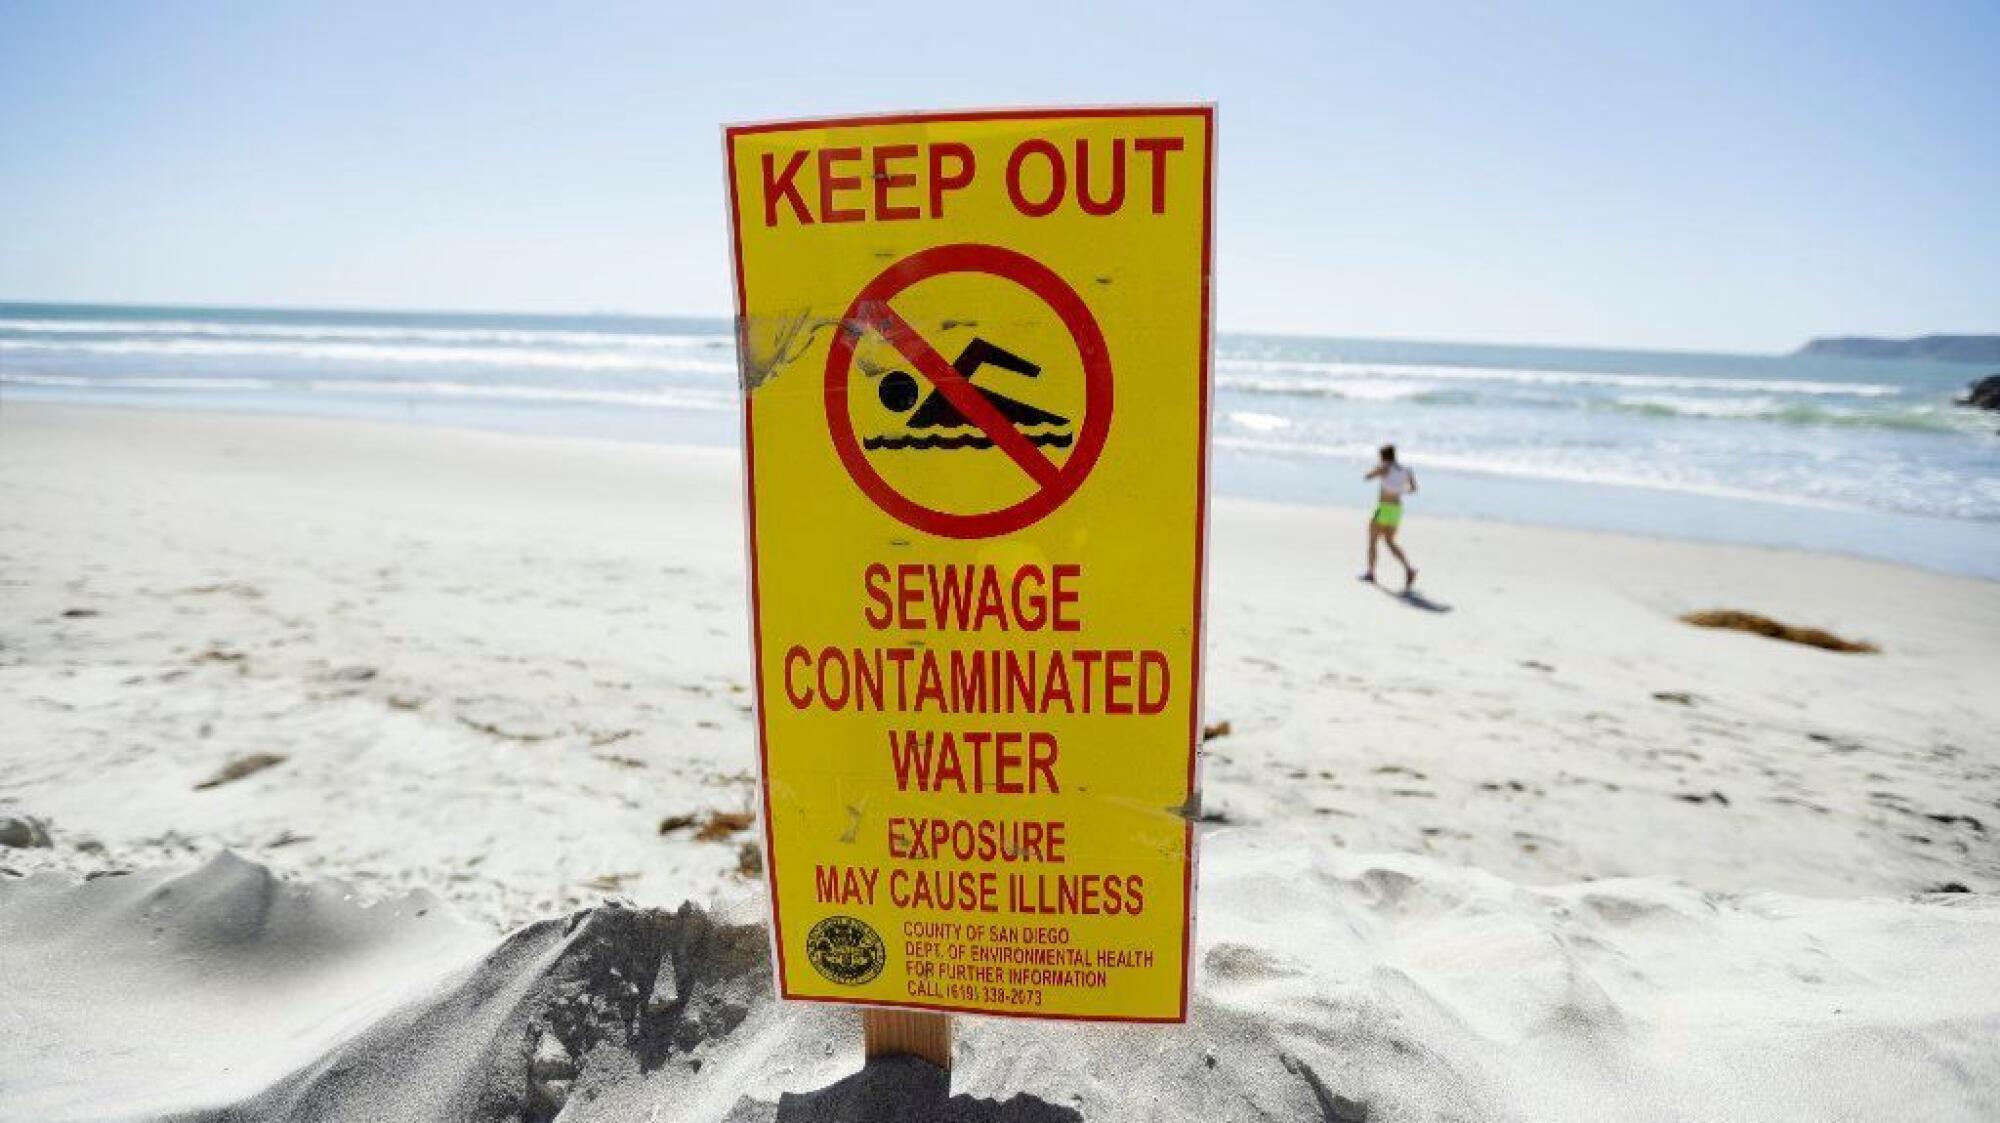 Coronado and Imperial Beach waters were closed to swimmers and surfers for weeks in early 2017 after millions of gallons of raw sewage spilled into the Tijuana River in Mexico and flowed north.